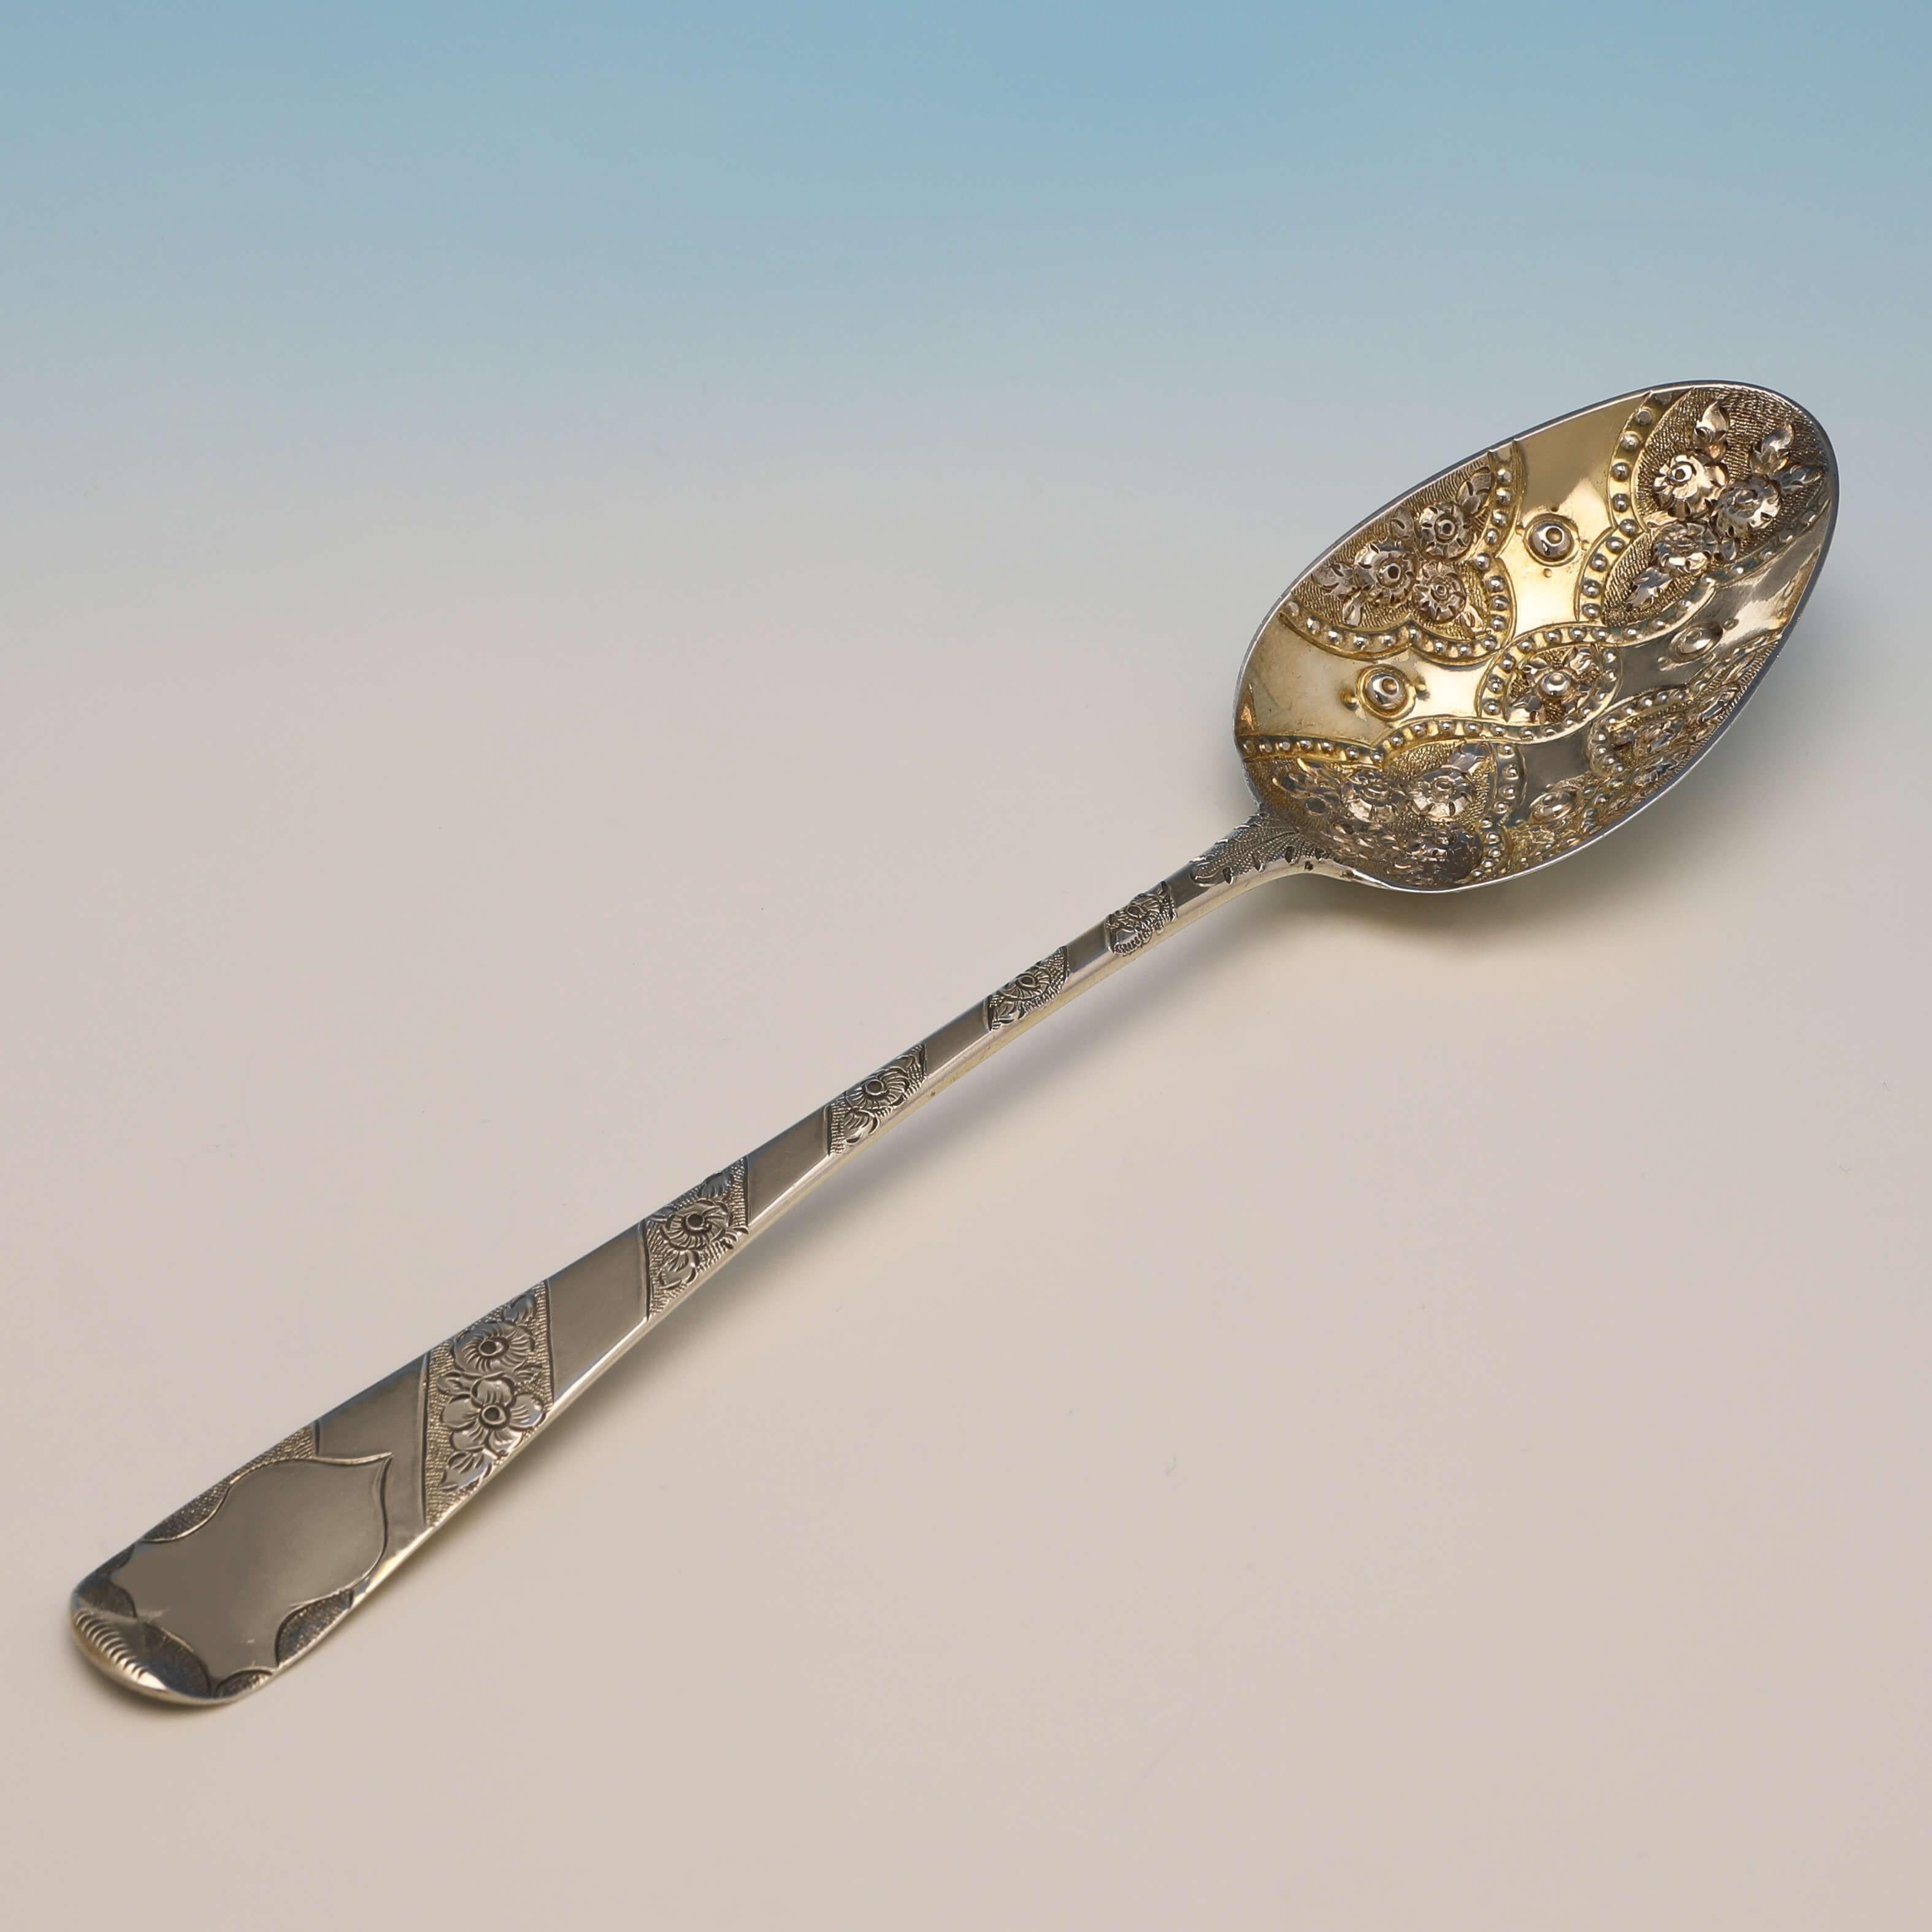 Hallmarked in London in 1809 and 1811 by Peter & William Bateman, this set of 4, antique sterling silver berry spoons, are presented in a box, and feature cashed bowls, engraved handles, and gilding. 

Each berry spoon measures 8.5